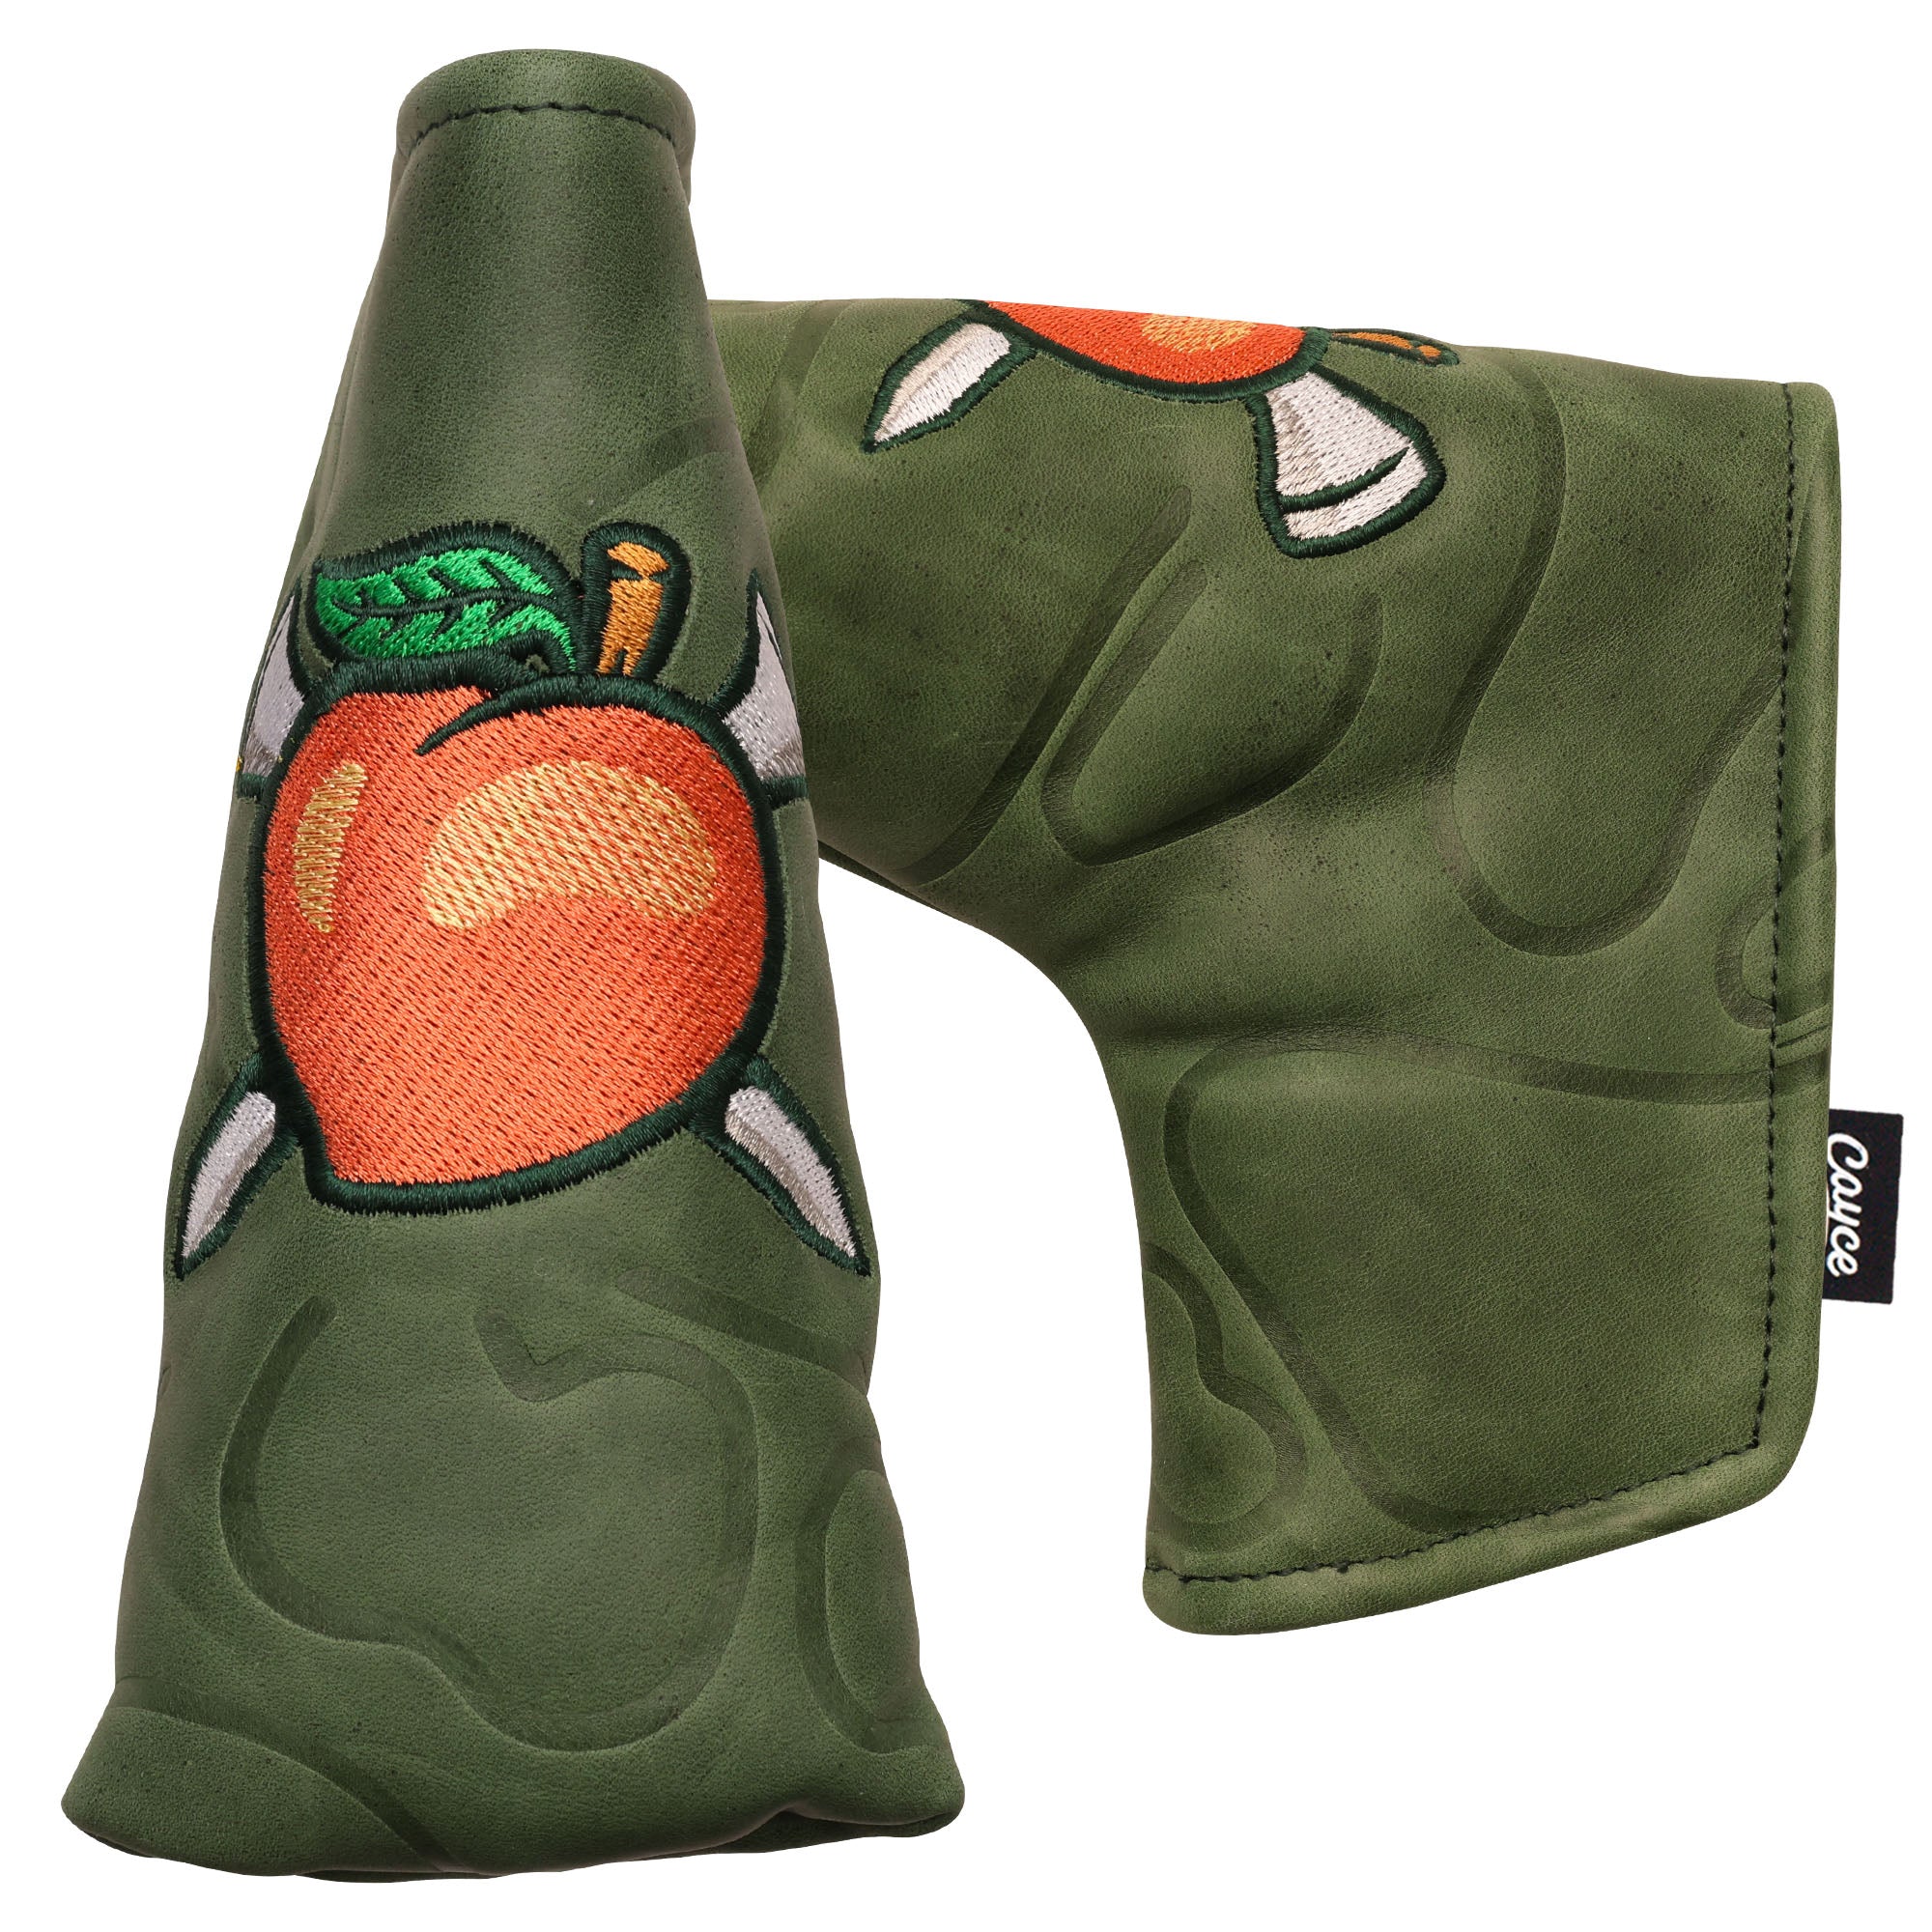 Peach Tee Leather Putter Cover